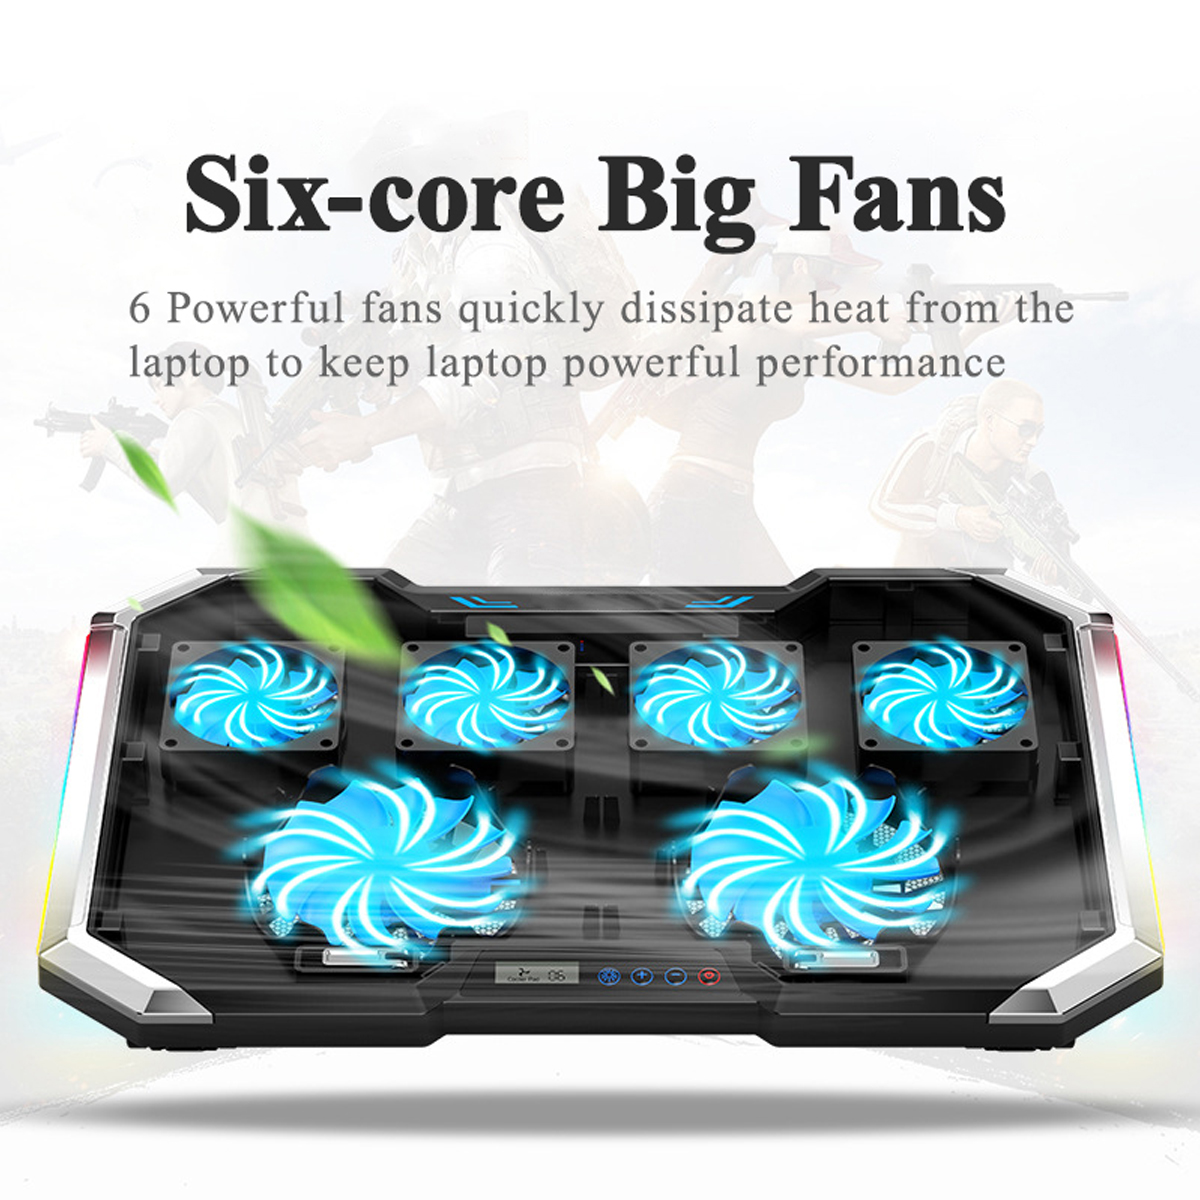 LCD Screen Notebook Cooler 6 Fan 6 Light Key Controlled RGB luminescence Computer Cooling Base Laptop Cooling Pads